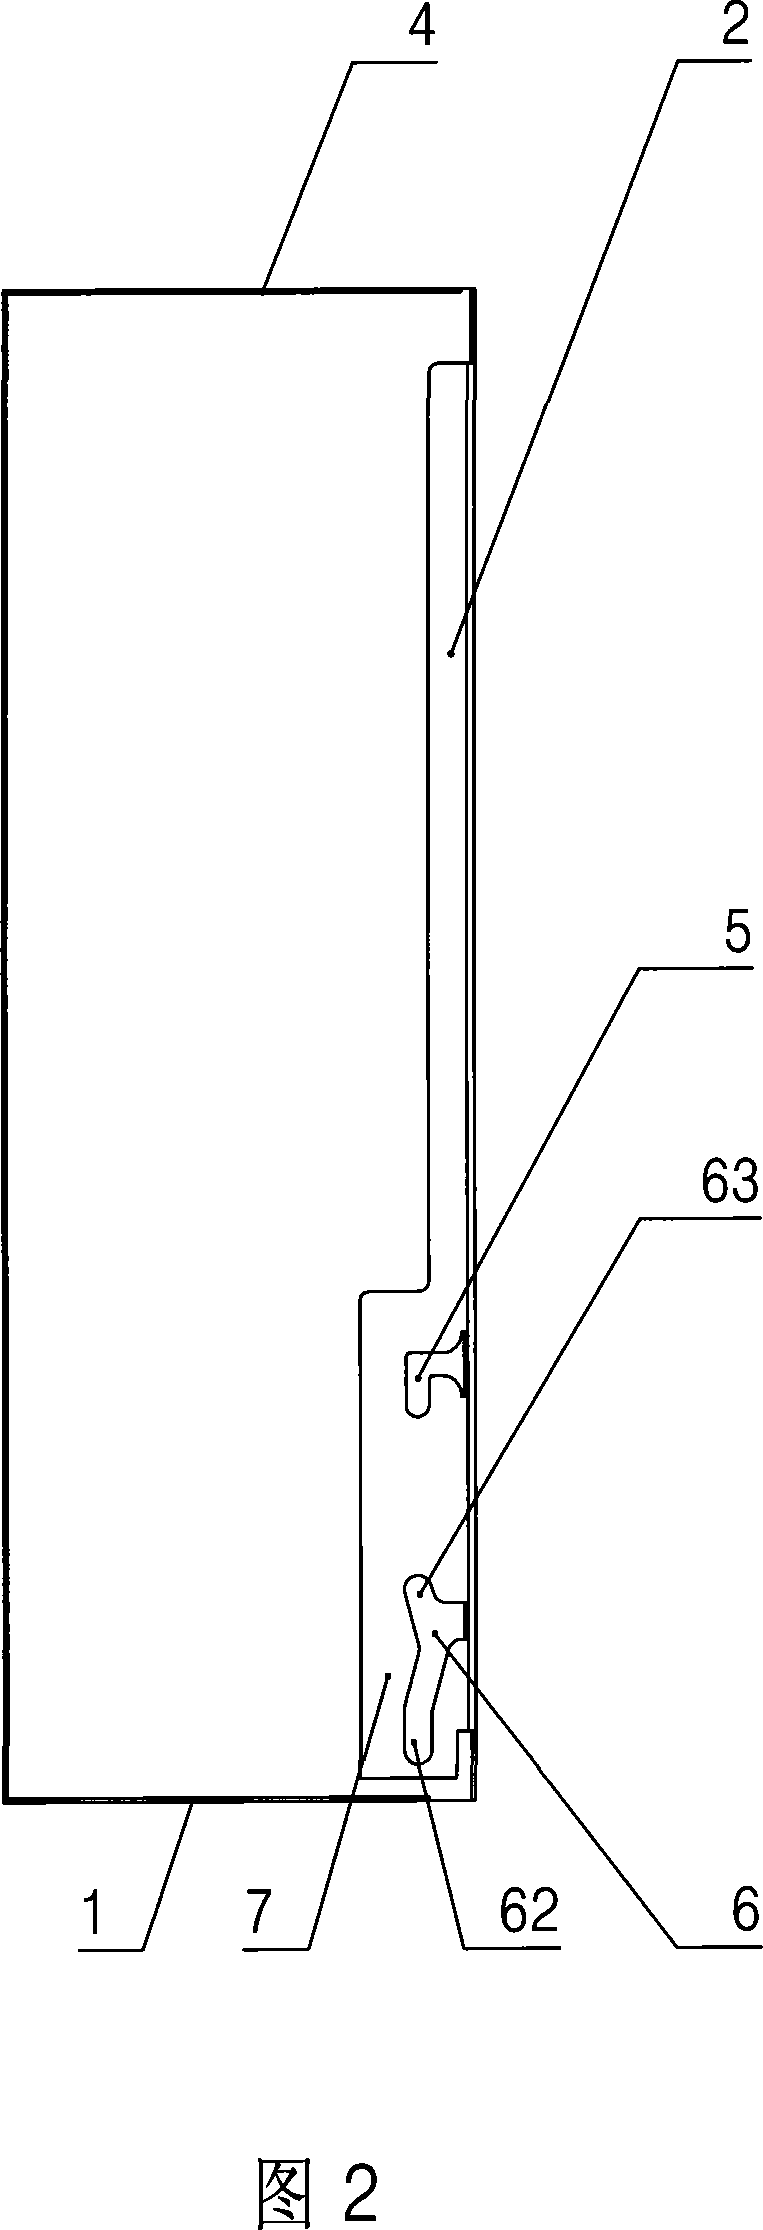 Mounting structure of placing rack in computer cabinet